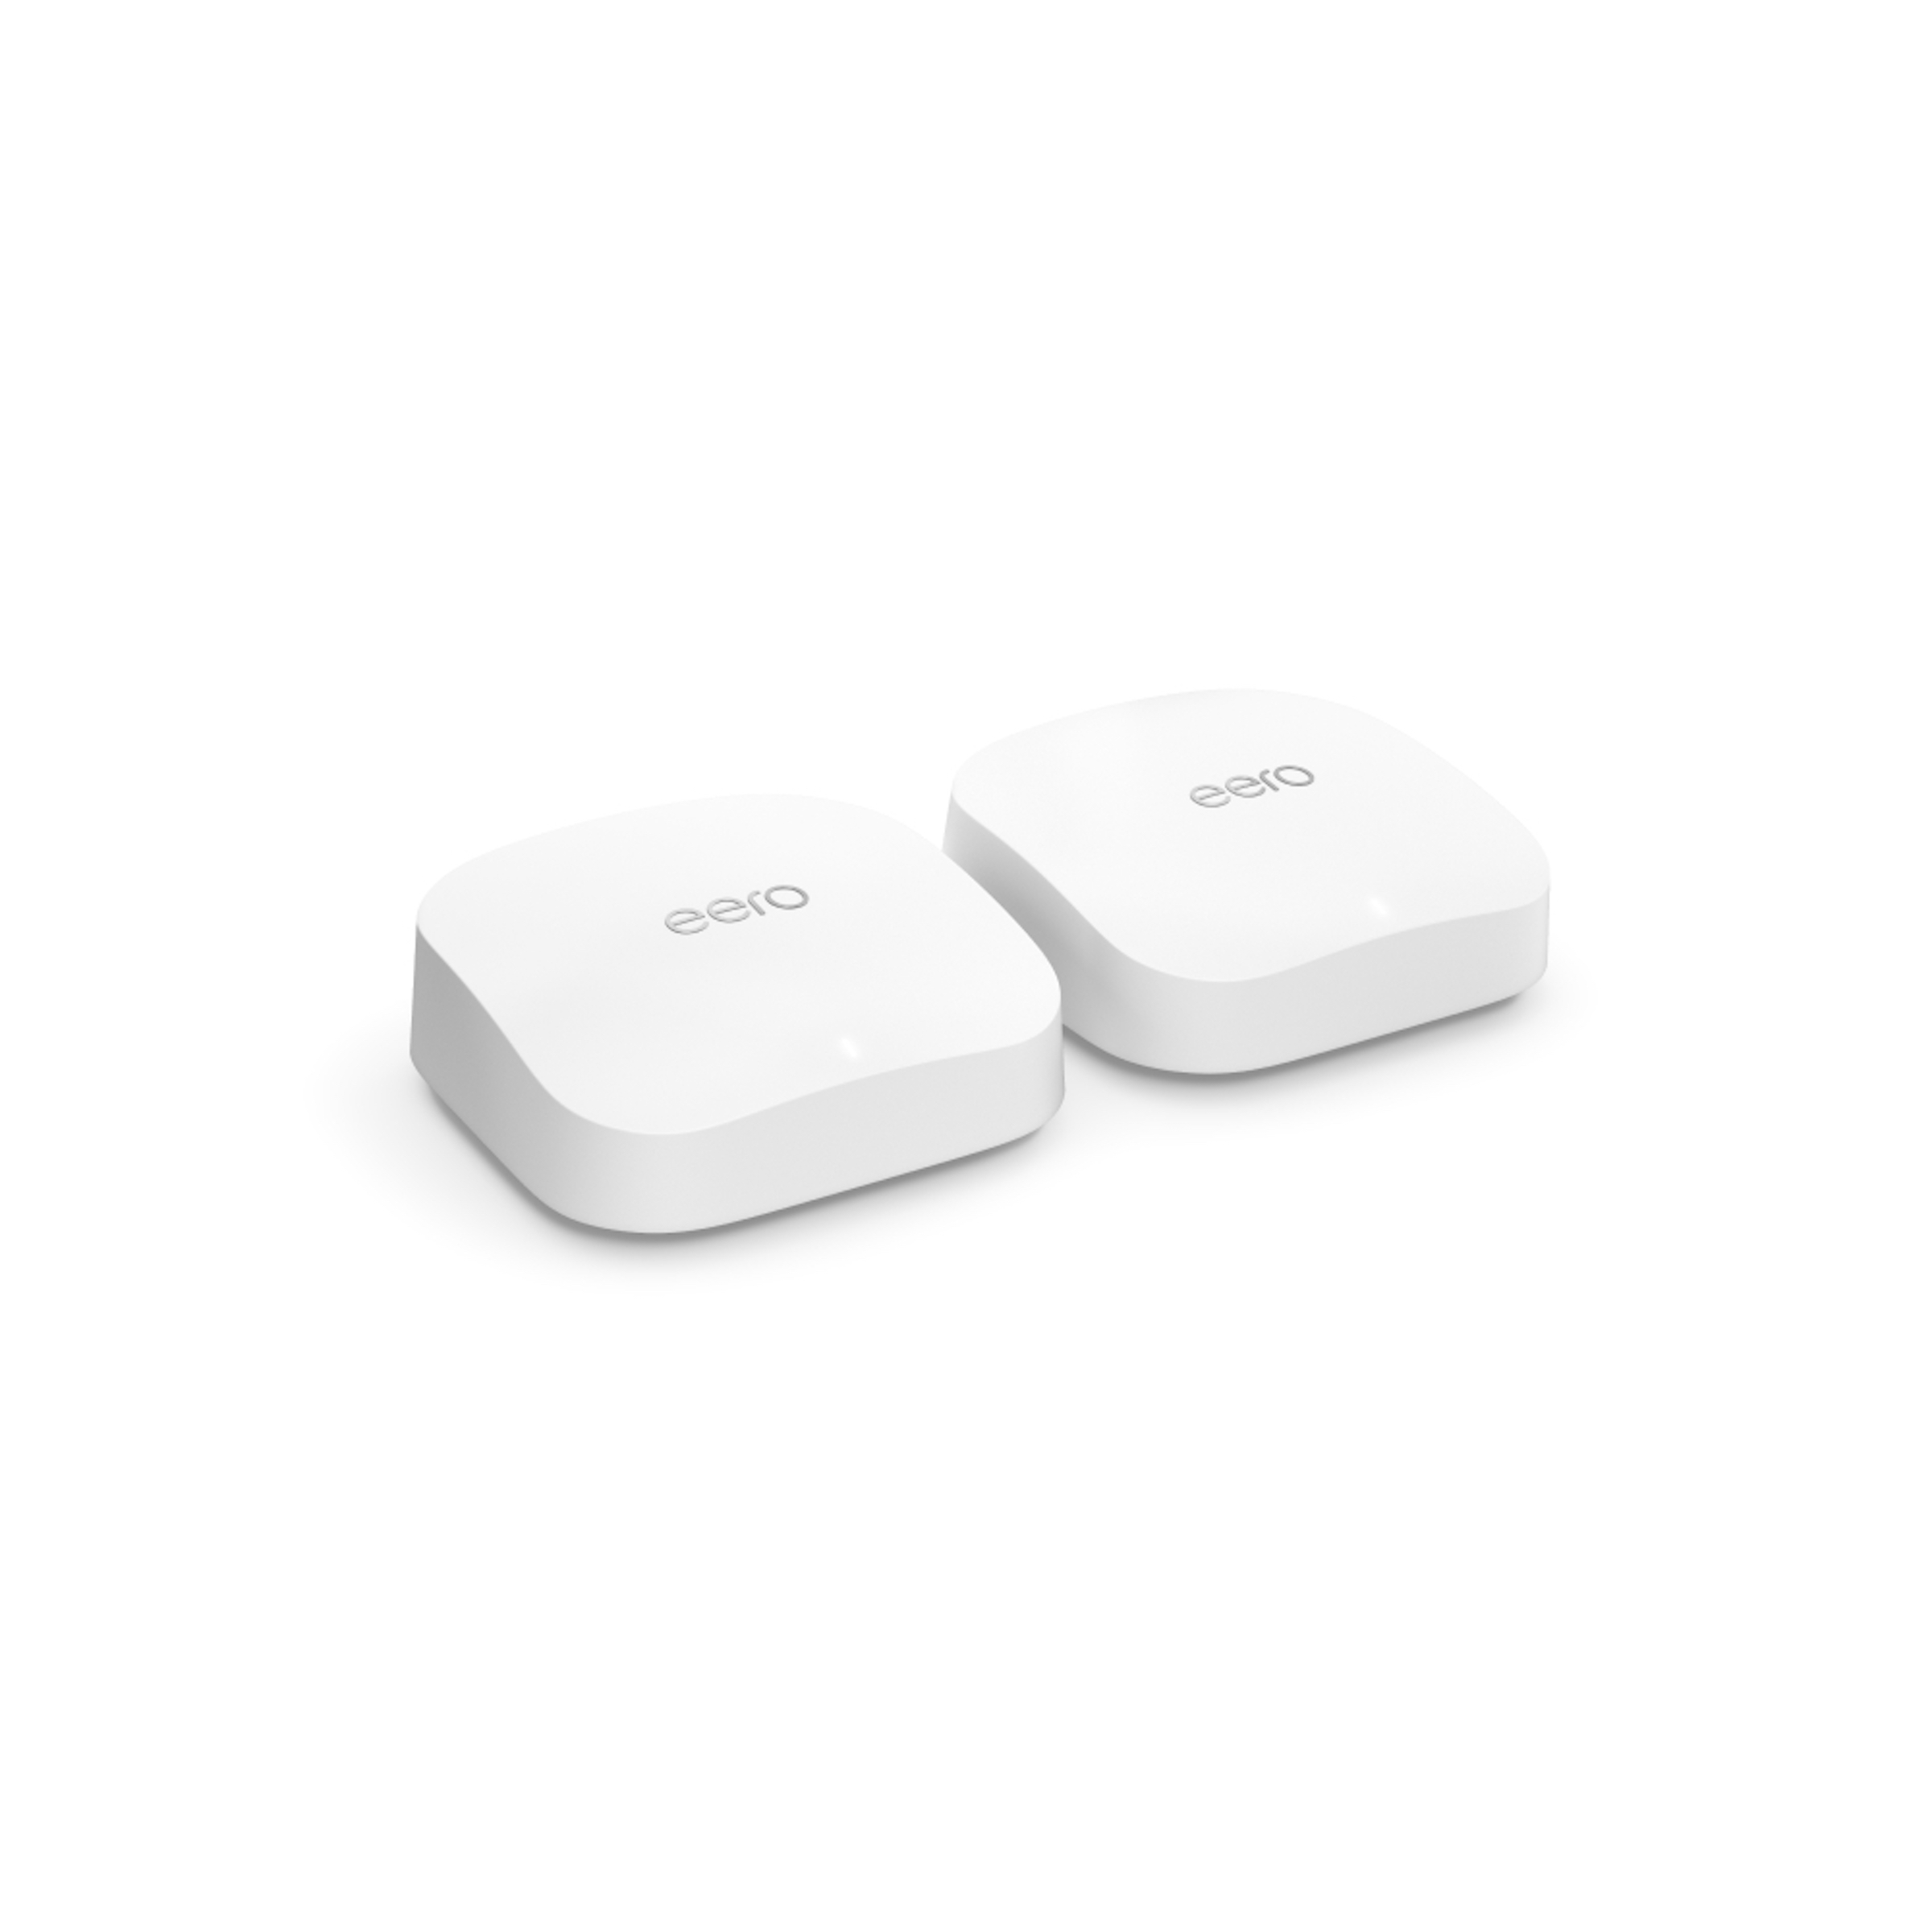 eero 6+ Dual Band Mesh Wi-Fi 6+ Router, 2.4 GHz and 5 GHz bands 1